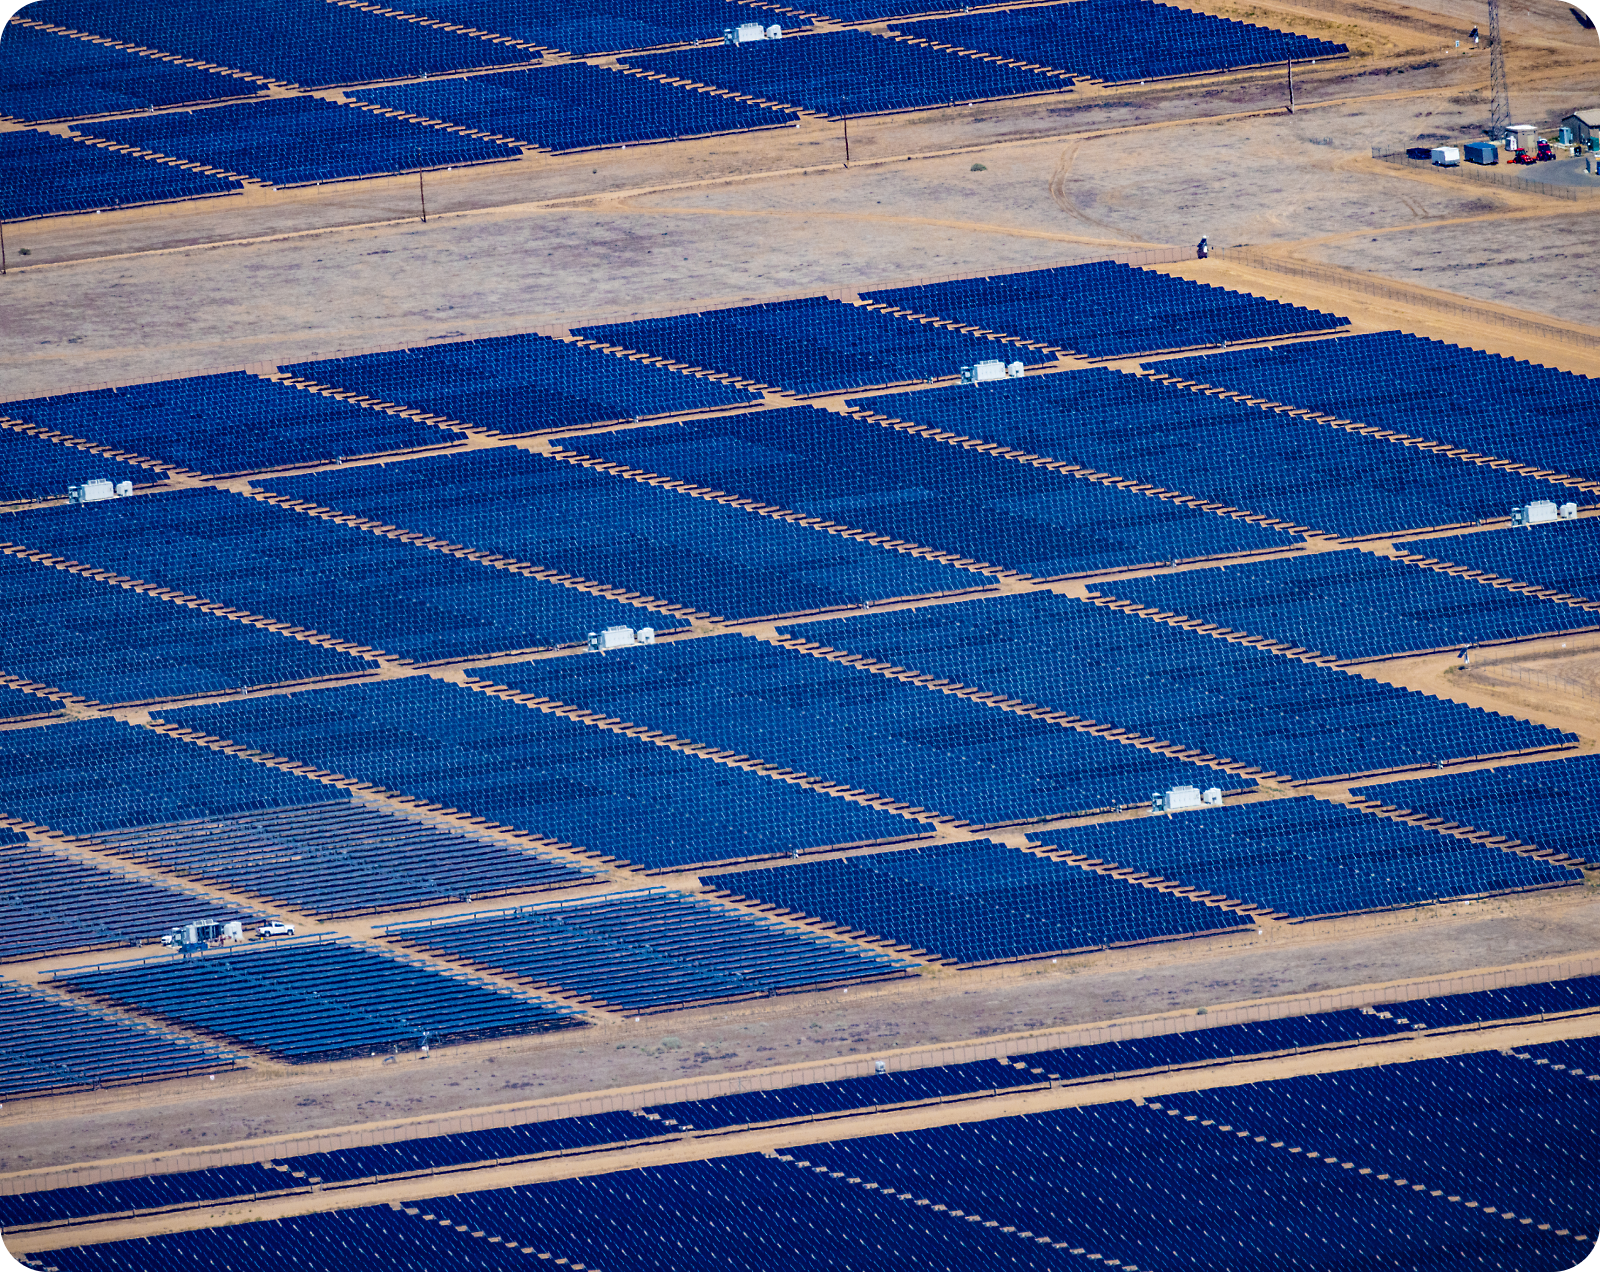 Aerial view of a large solar farm in a desert, featuring extensive rows of blue solar panels arranged in a grid pattern